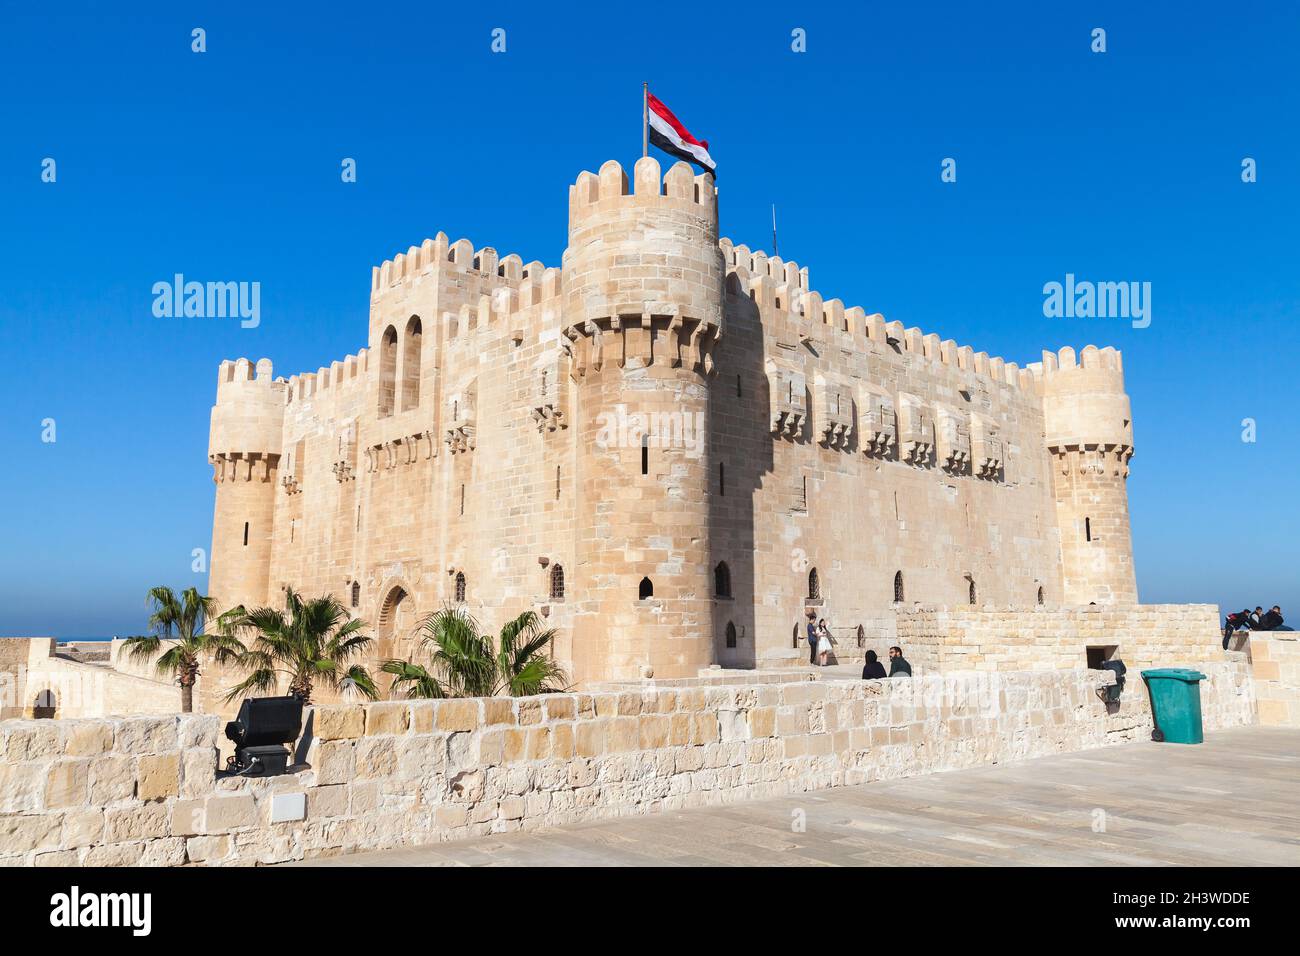 Alexandria, Egypt - December 14, 2018: The Citadel of Qaitbay or the Fort of Qaitbay is a 15th-century defensive fortress located on the Mediterranean Stock Photo